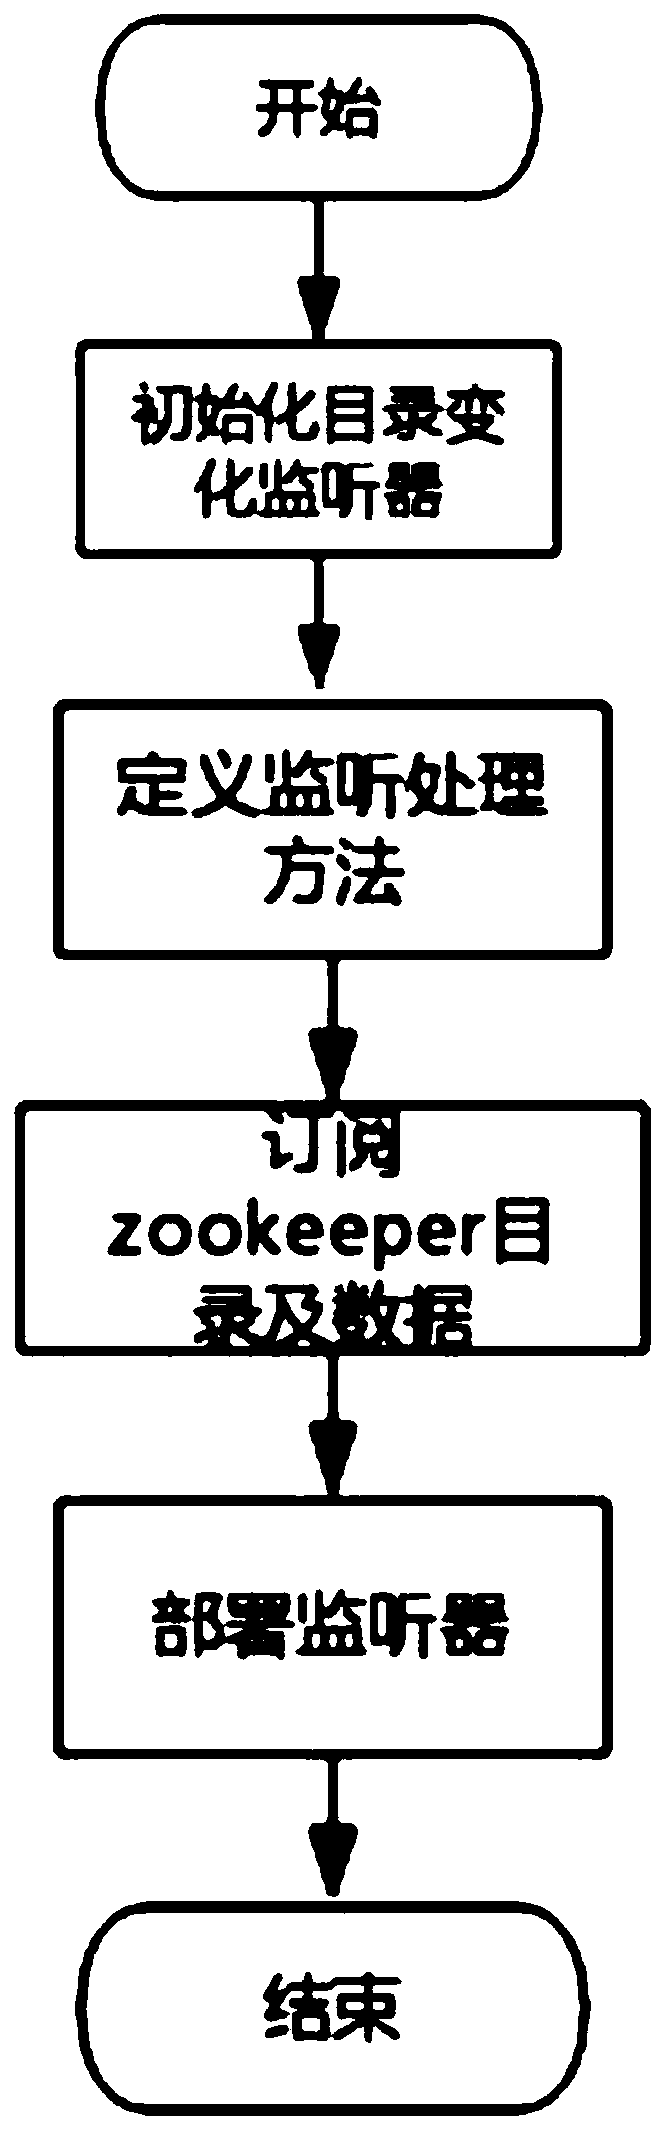 A distributed architecture data consistency method based on a Zookeeper